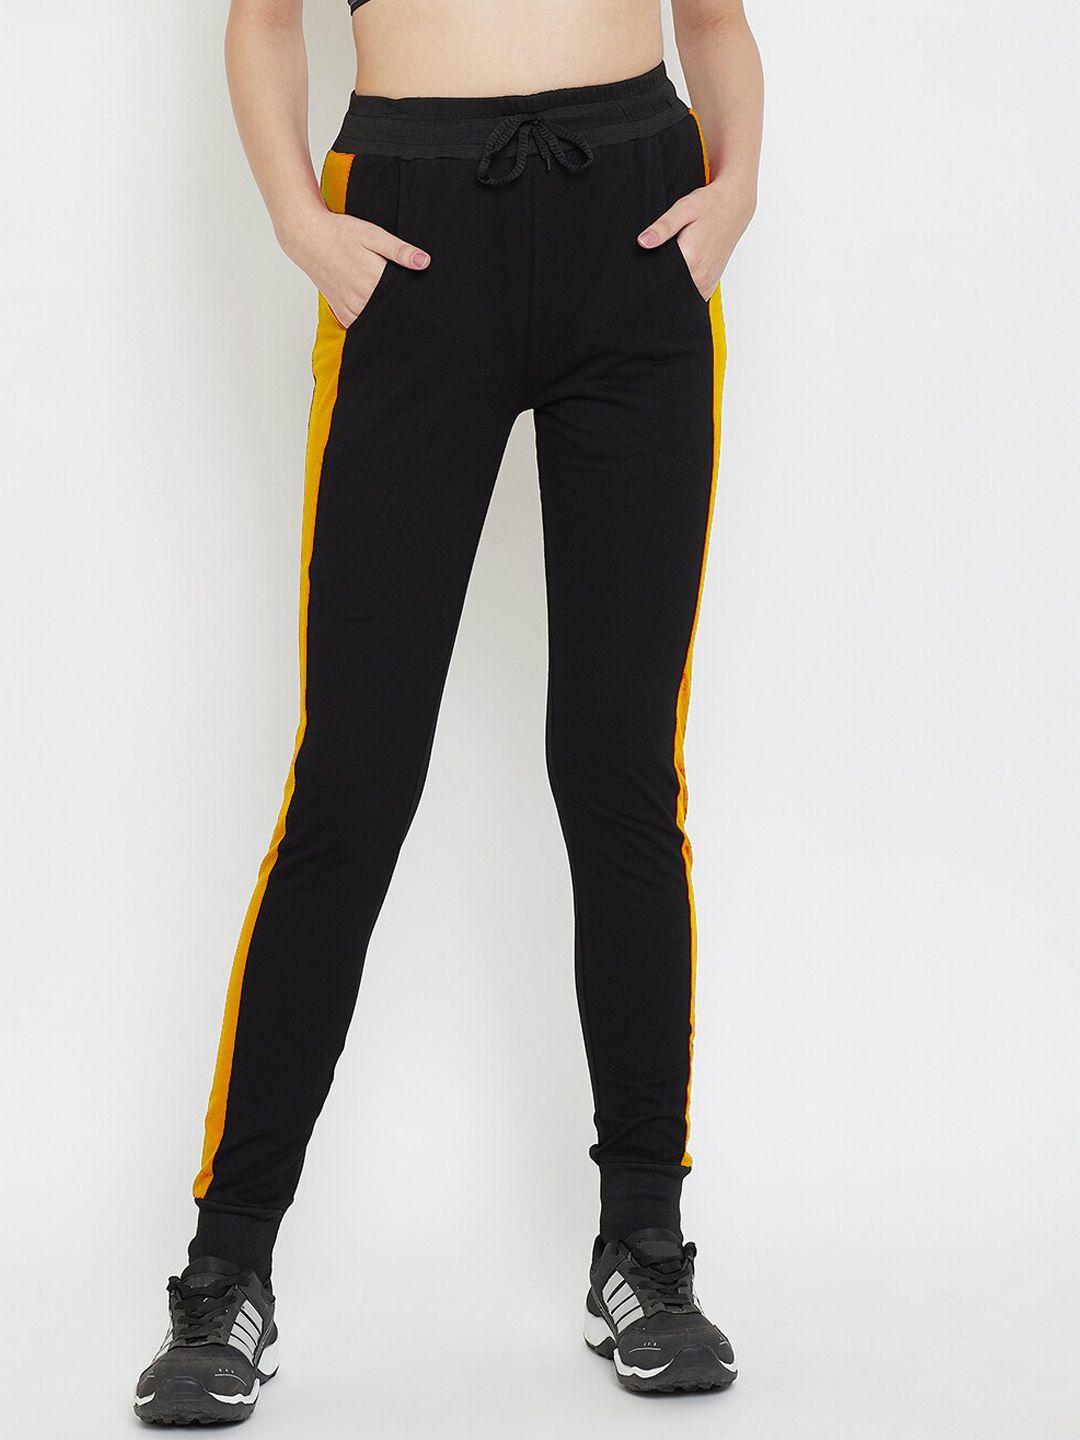 crease & clips women black & yellow solid slim fit joggers